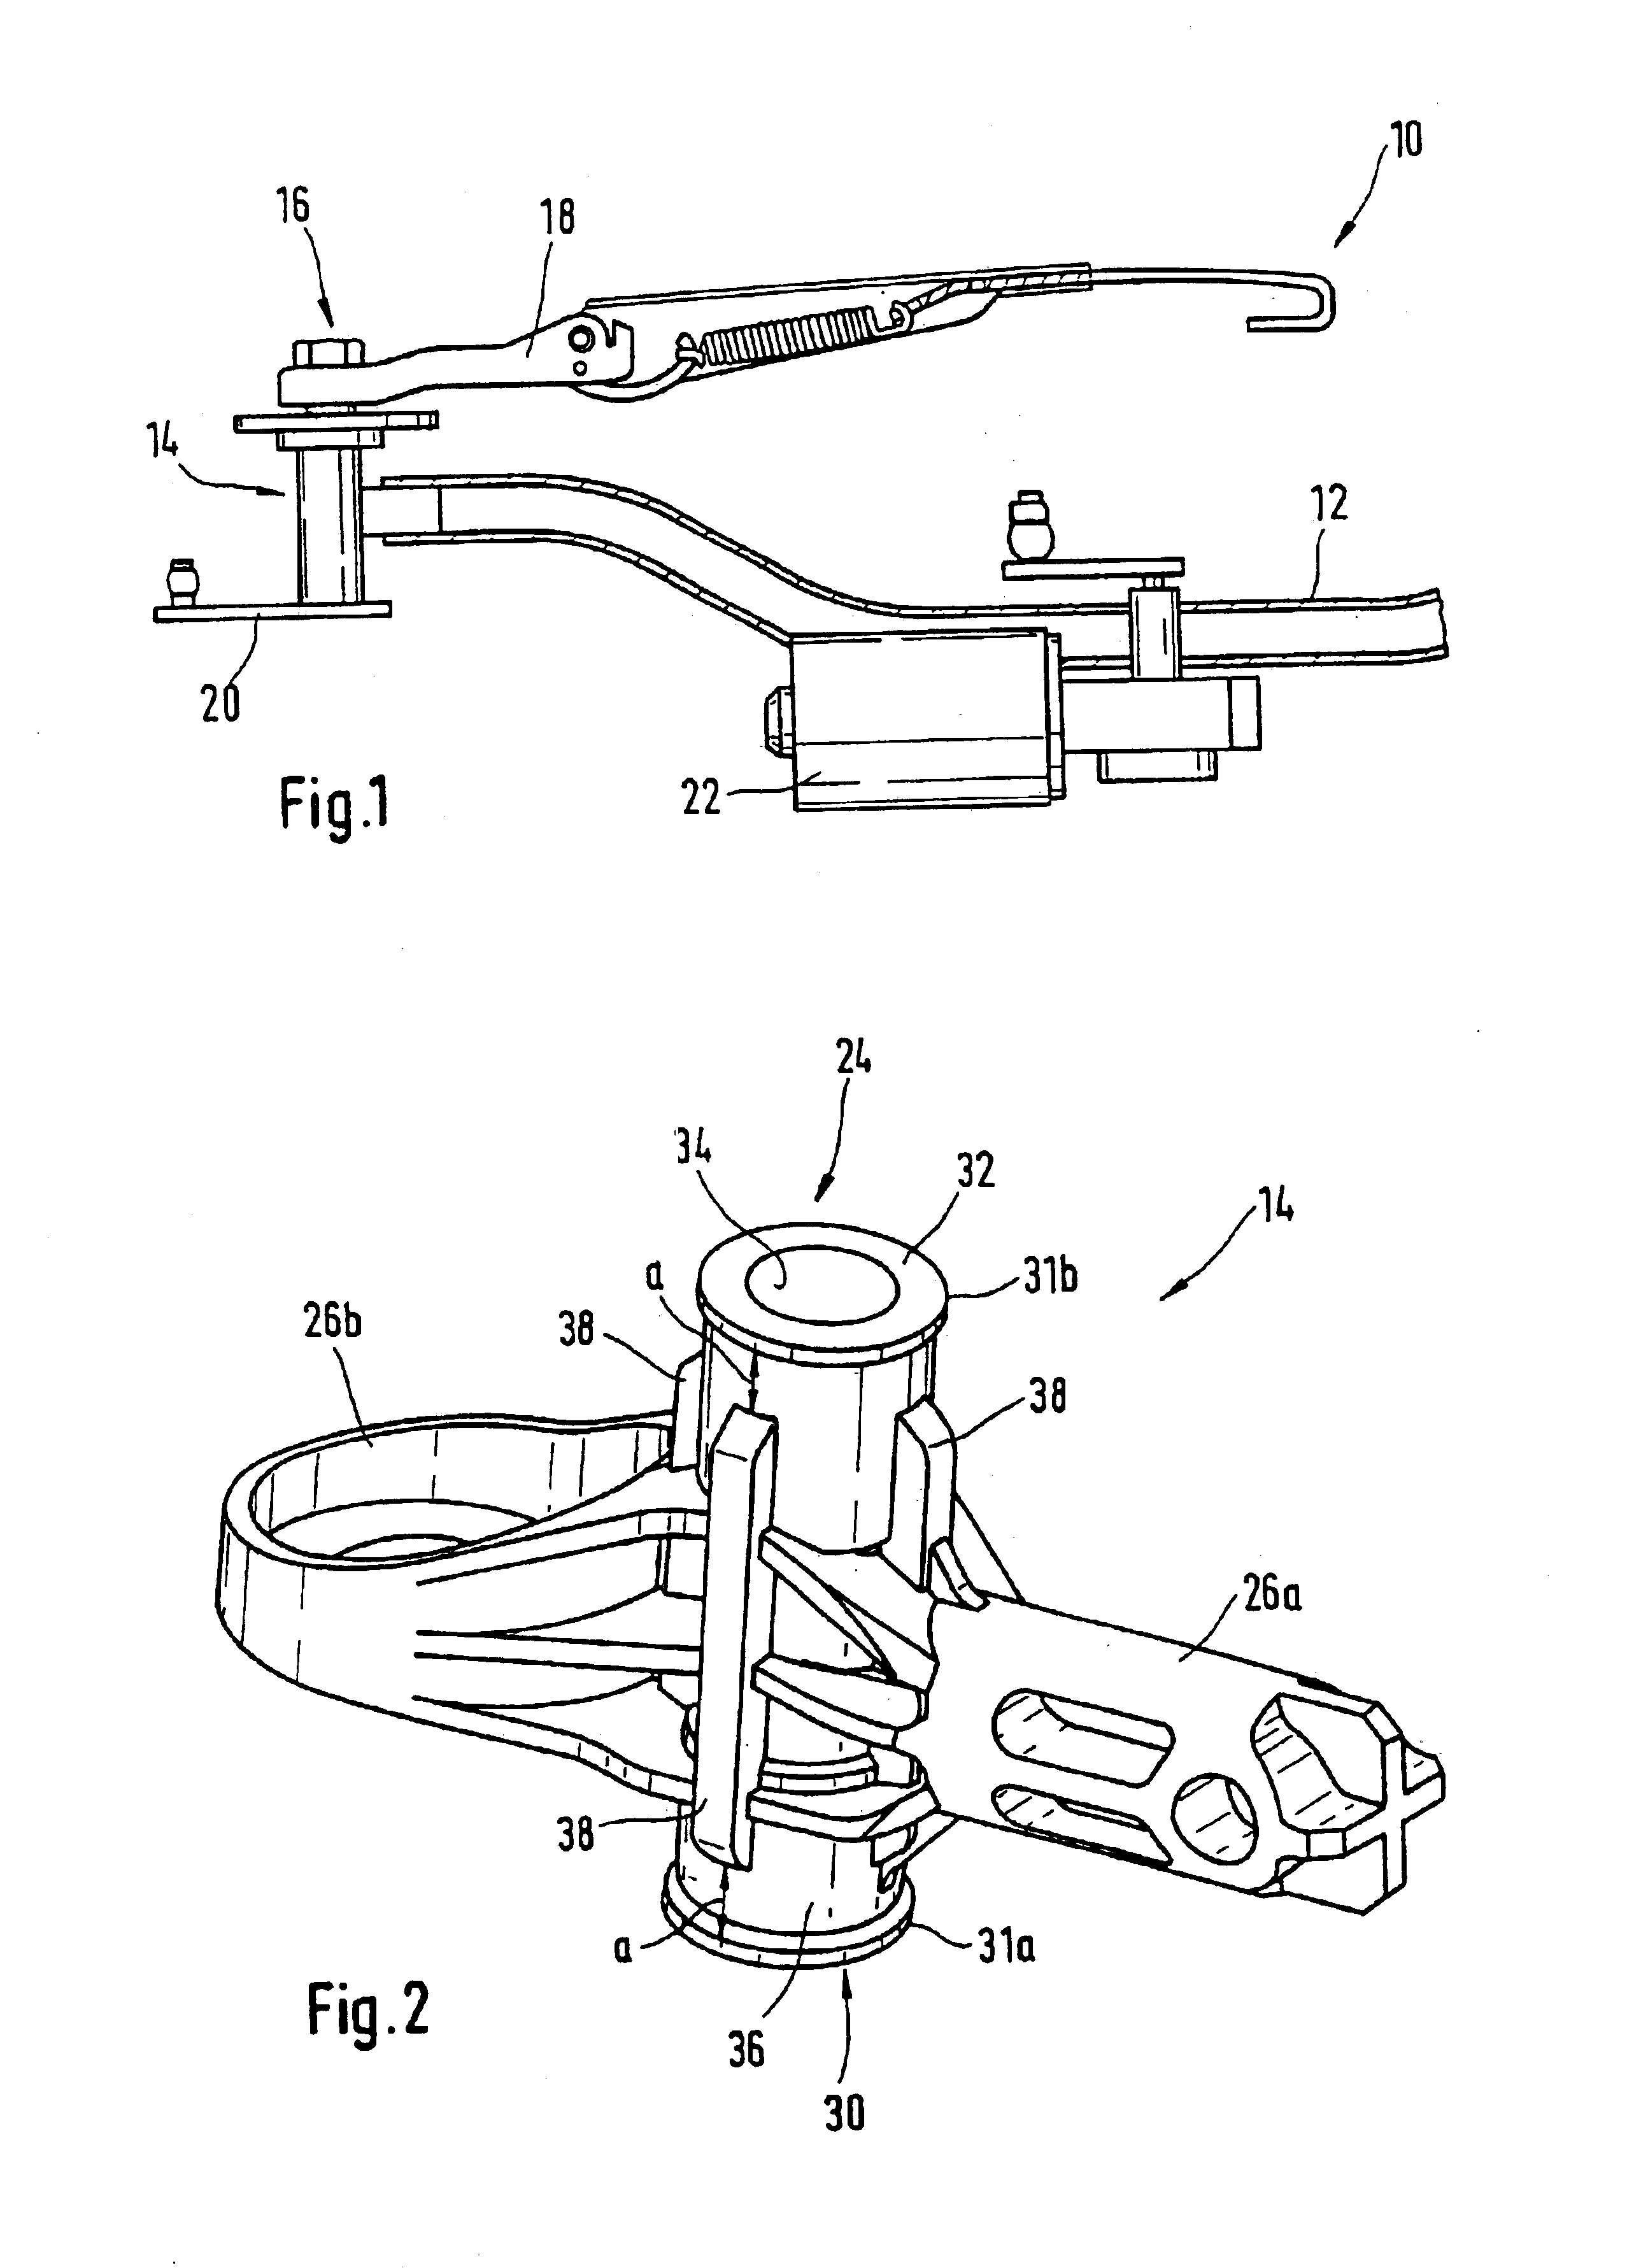 Windshield wiper, especially for motor vehicles and method for production of said windshield wiper